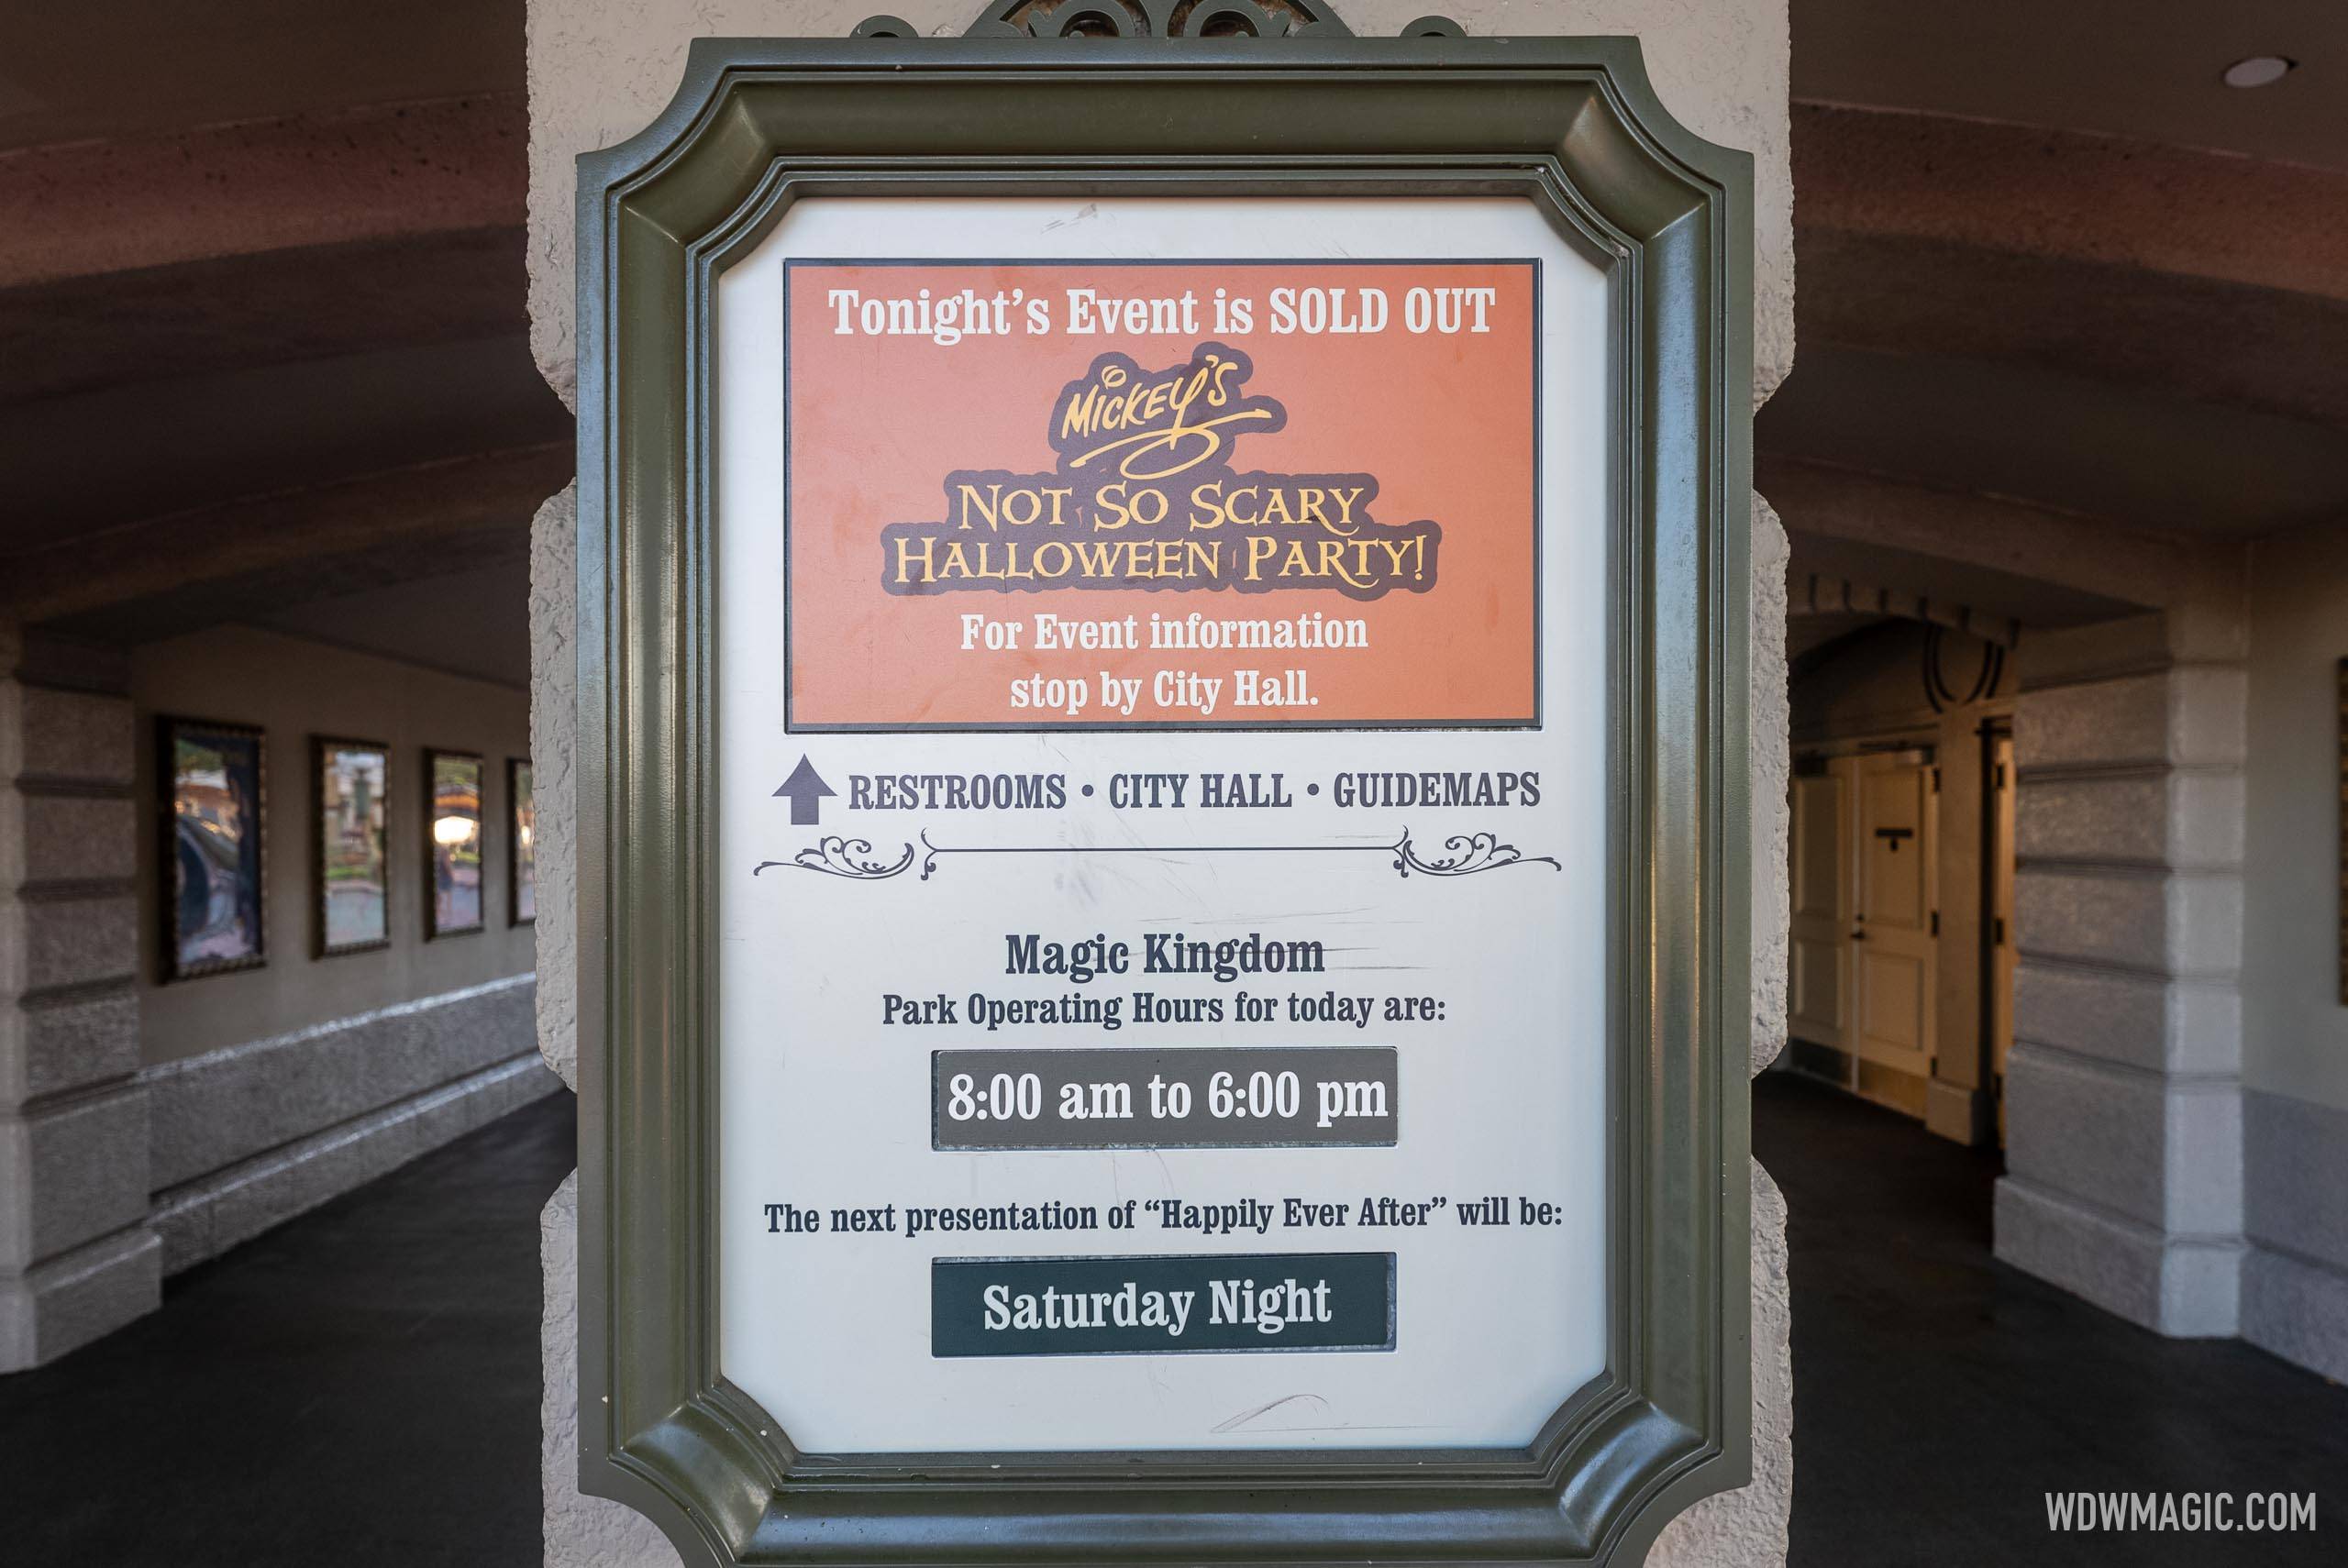 Mickey's Not-So-Scary Halloween Party sold out sign